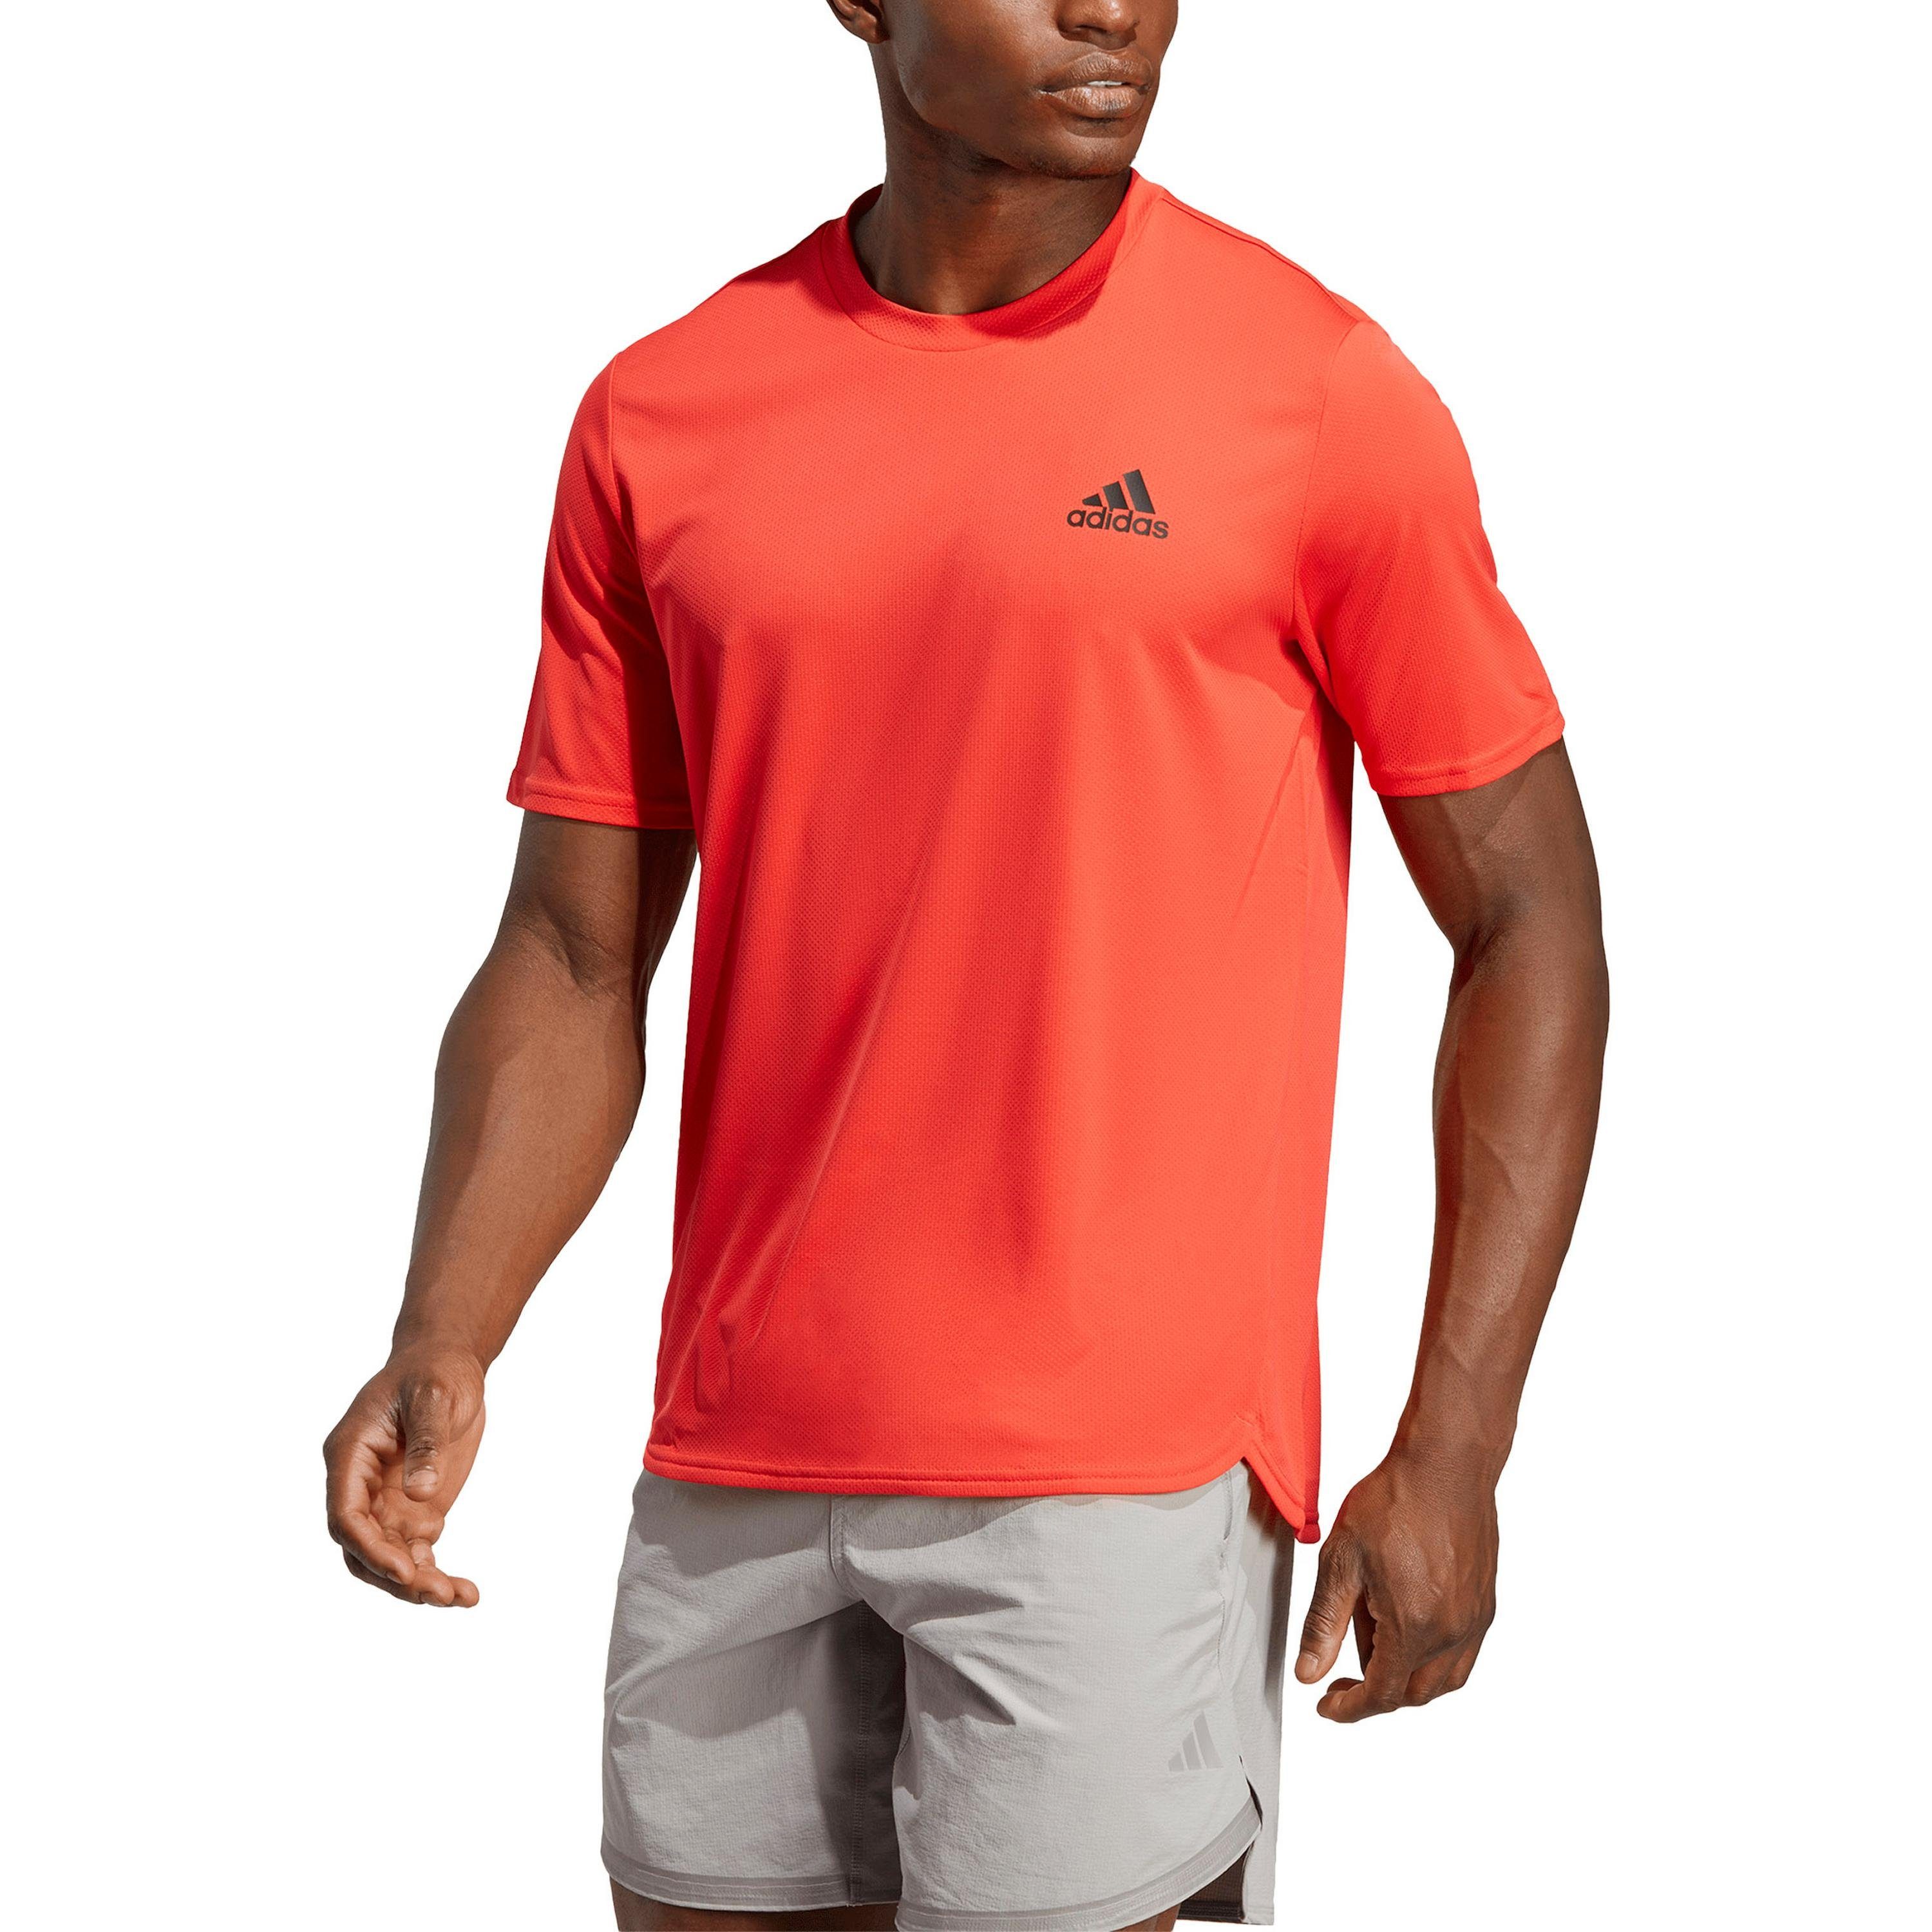 red-black Performance DESIGNED Funktionsshirt FOR adidas AEROREADY MOVEMENT bright